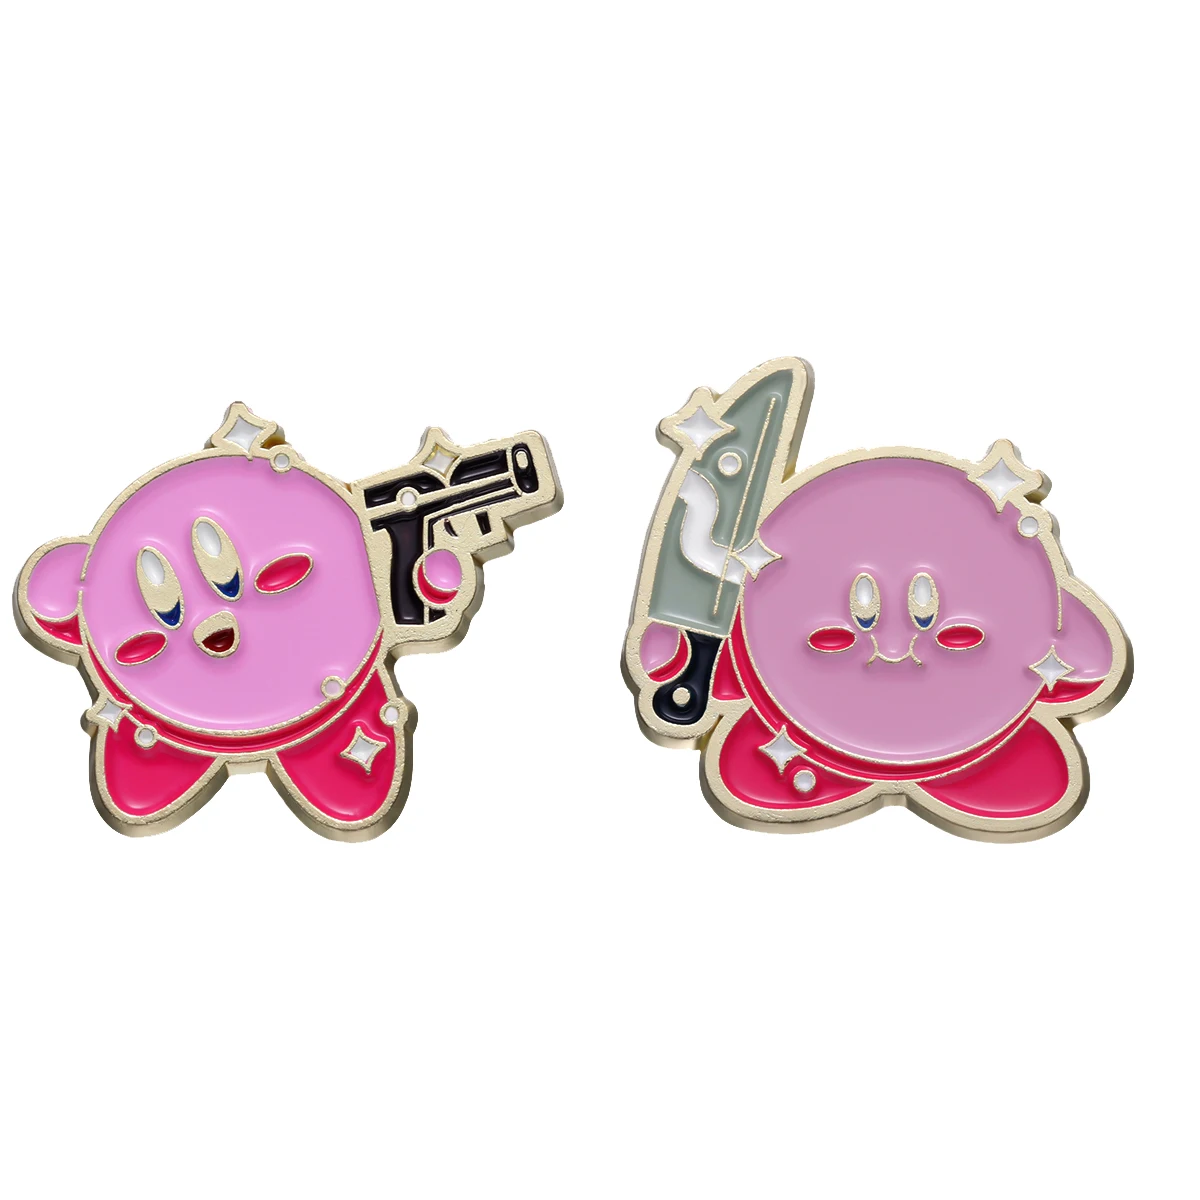 

2pcs/set Kirby Pink Enamel Brooch Cute Dagger Character Pins Clothes Backpack Lapel Badges Fashion Jewelry Accessories Gifts